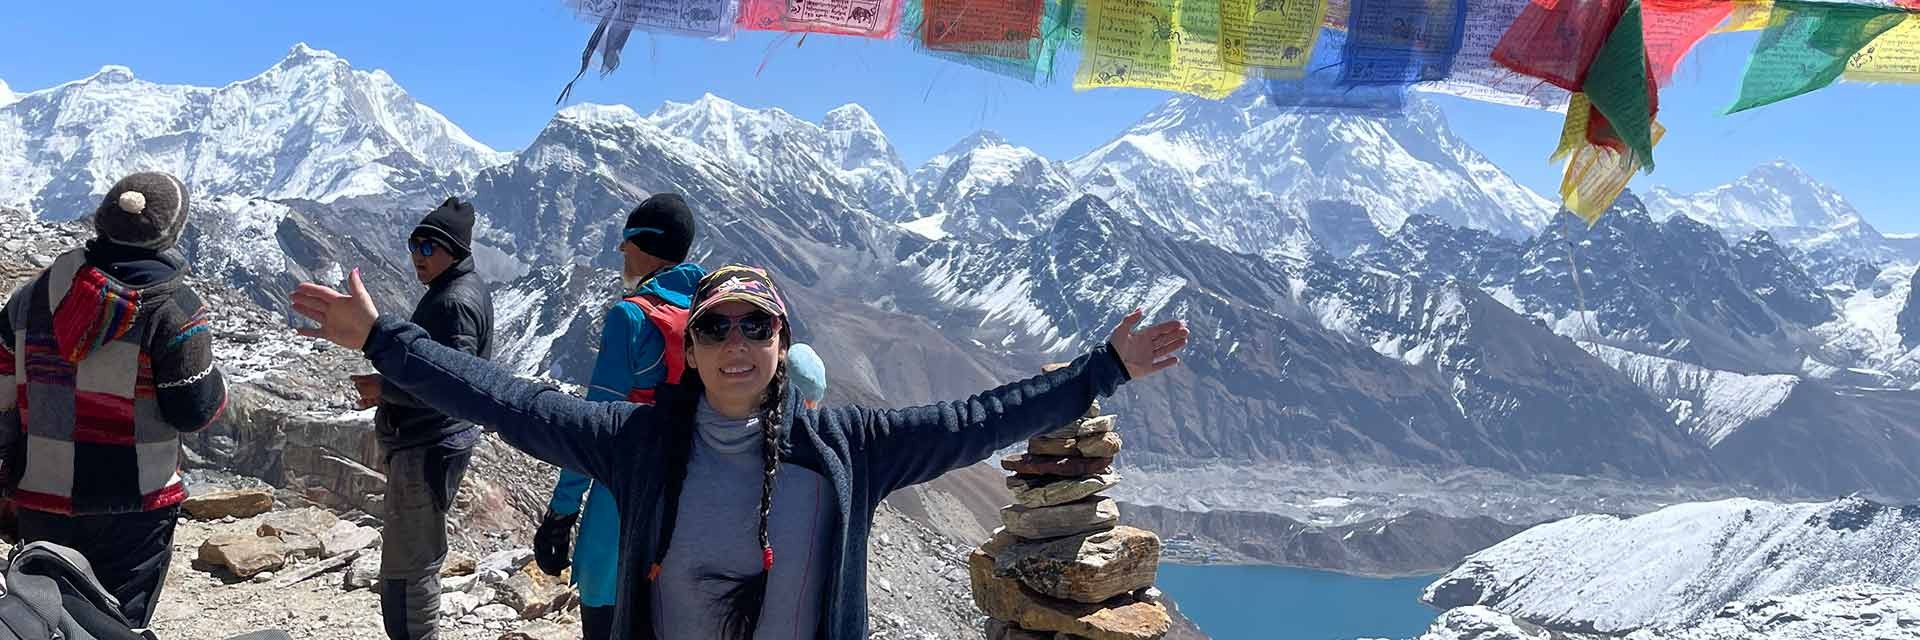 Everest Base Camp with Gokyo and Cho La Pass Trek